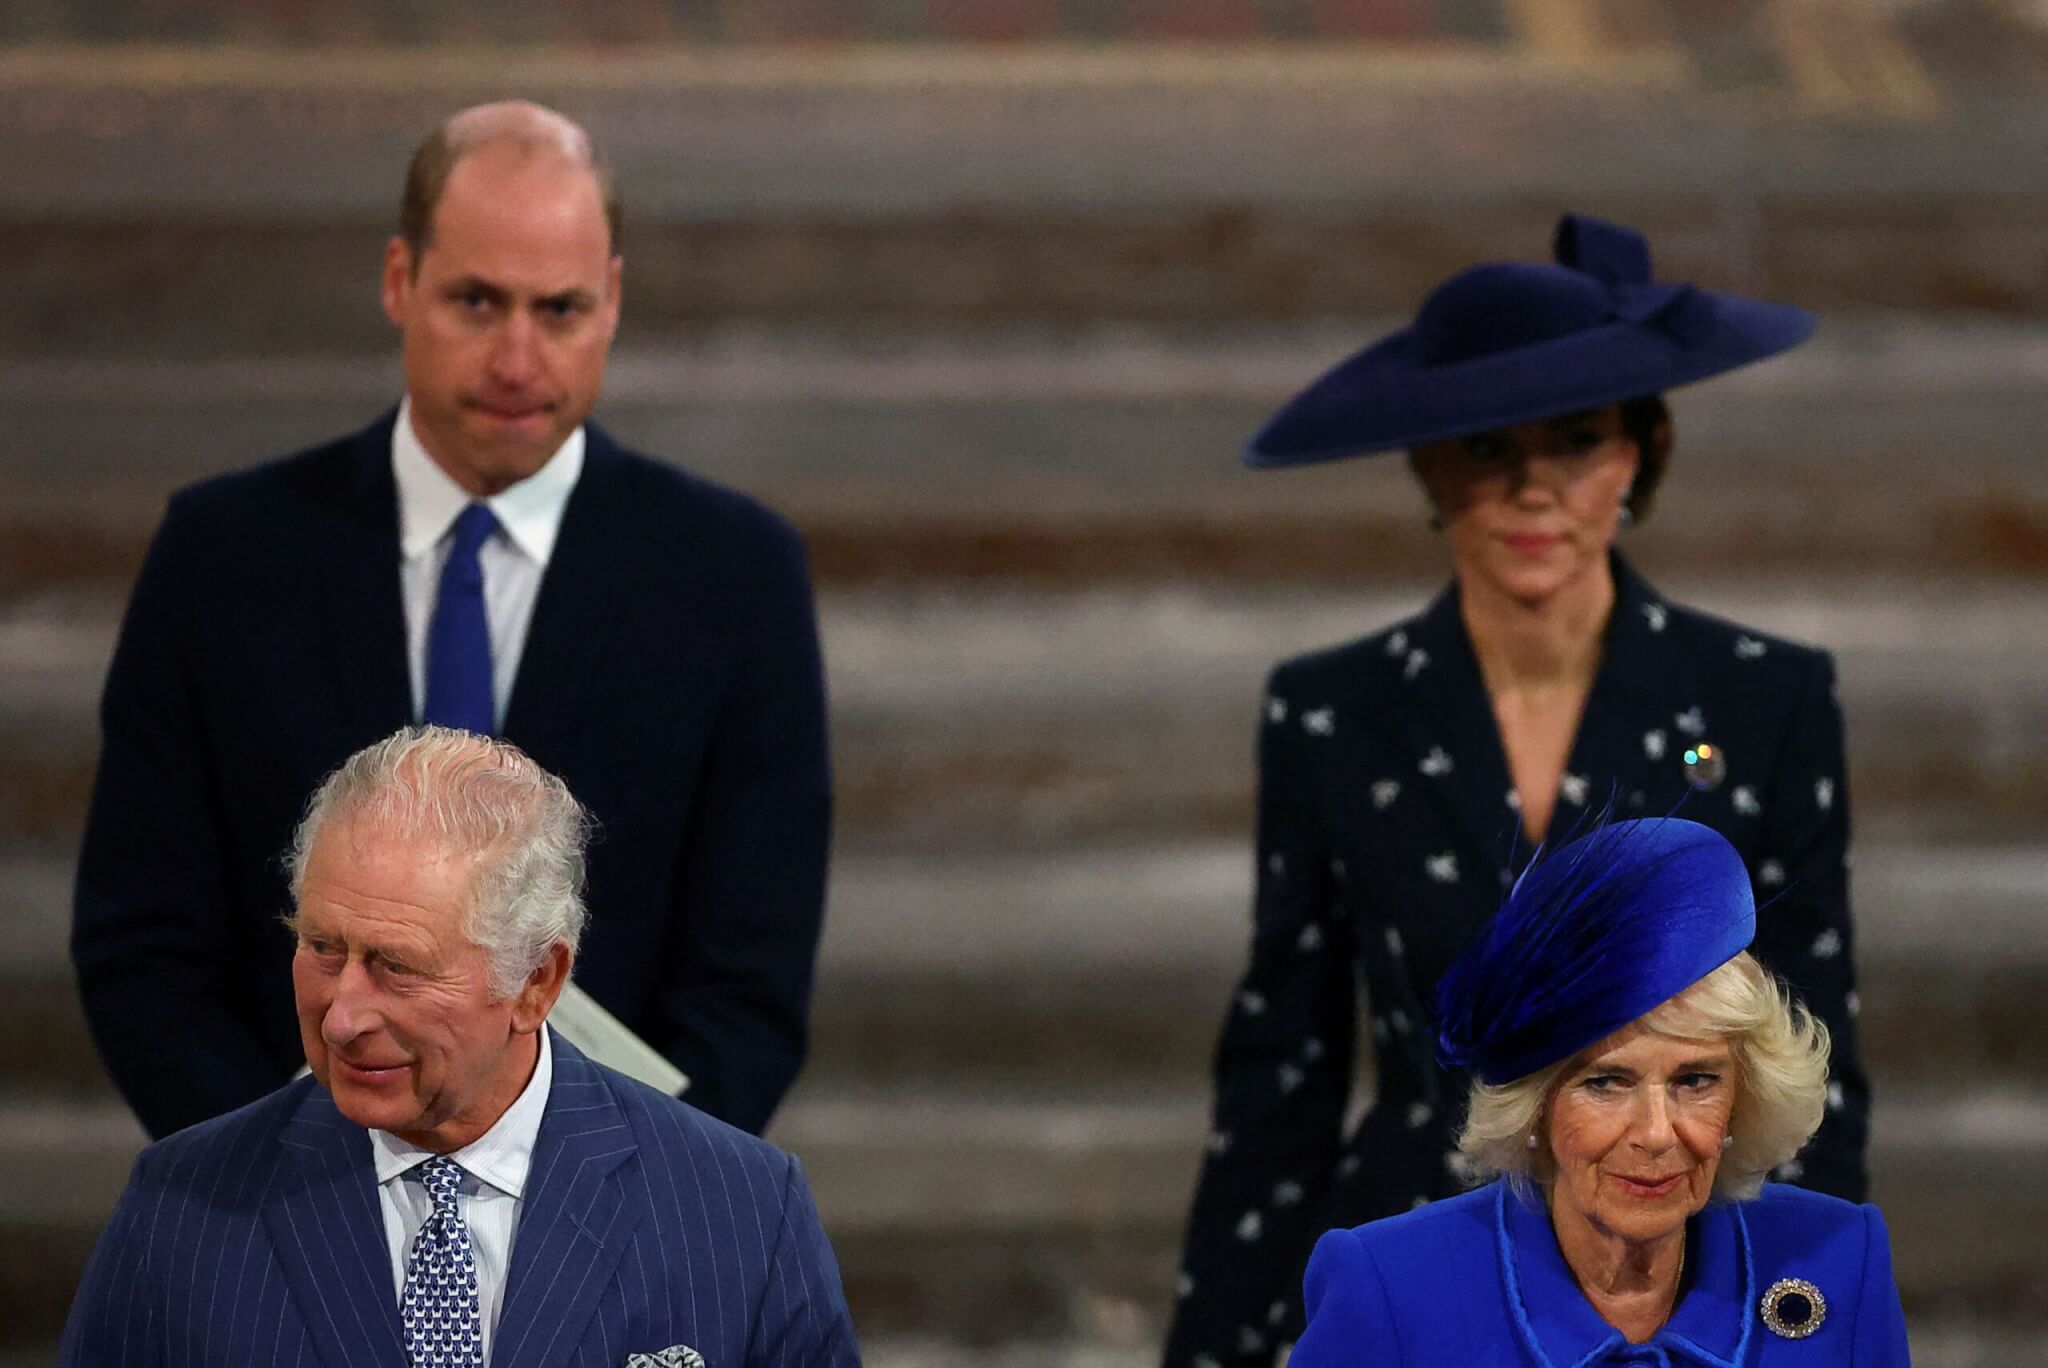 King Charles III, Camilla Queen Consort, Prince William and Catherine Princess of Wales, attend the Commonwealth Day service held at Westminster Abbey in London, Britain, March 13, 2023.